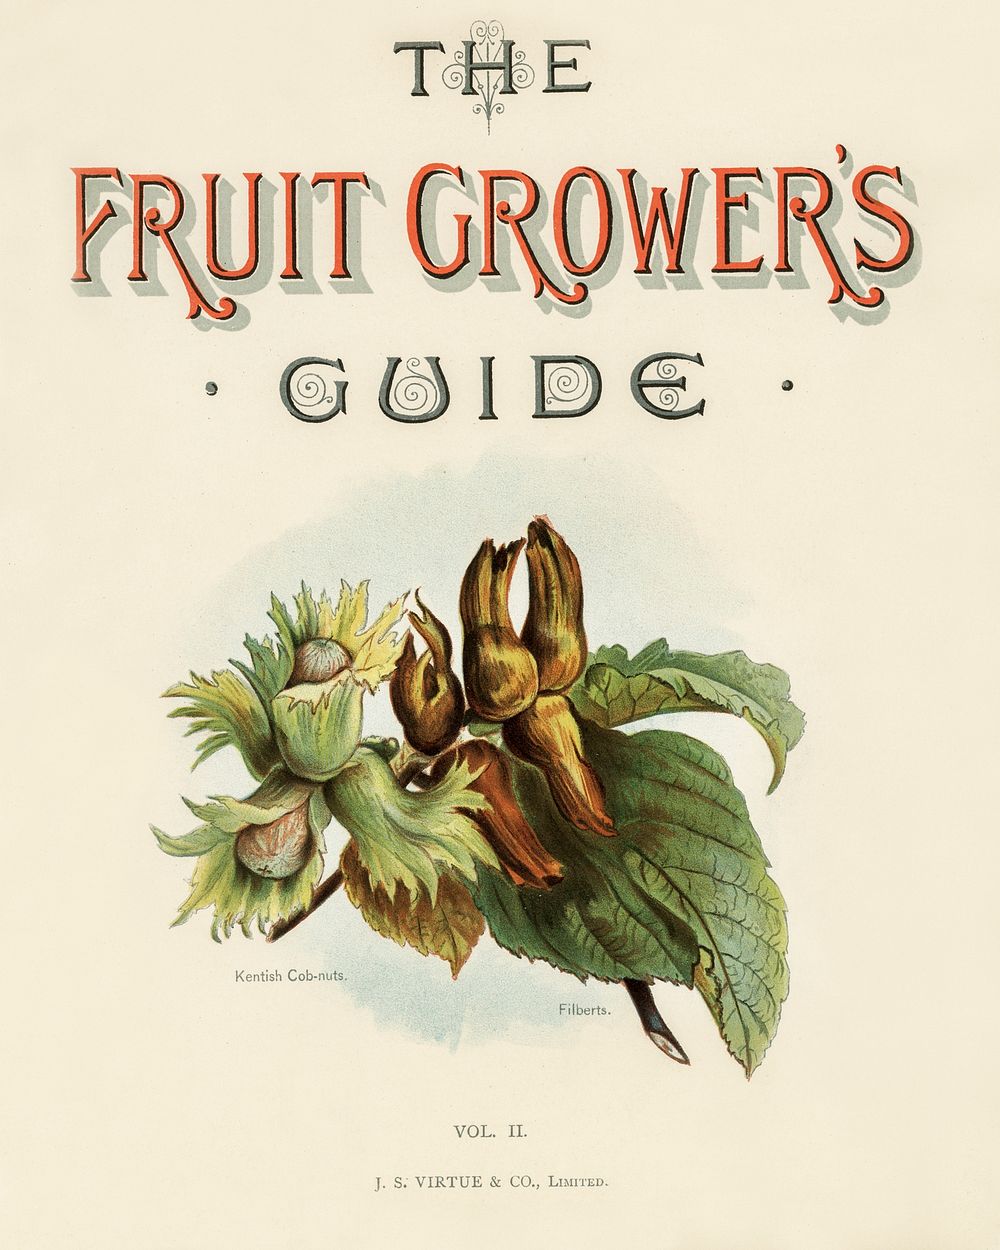 Vintage illustrations of fruits digitally enhanced from our own vintage edition of The Fruit Grower's Guide (1891) by John…